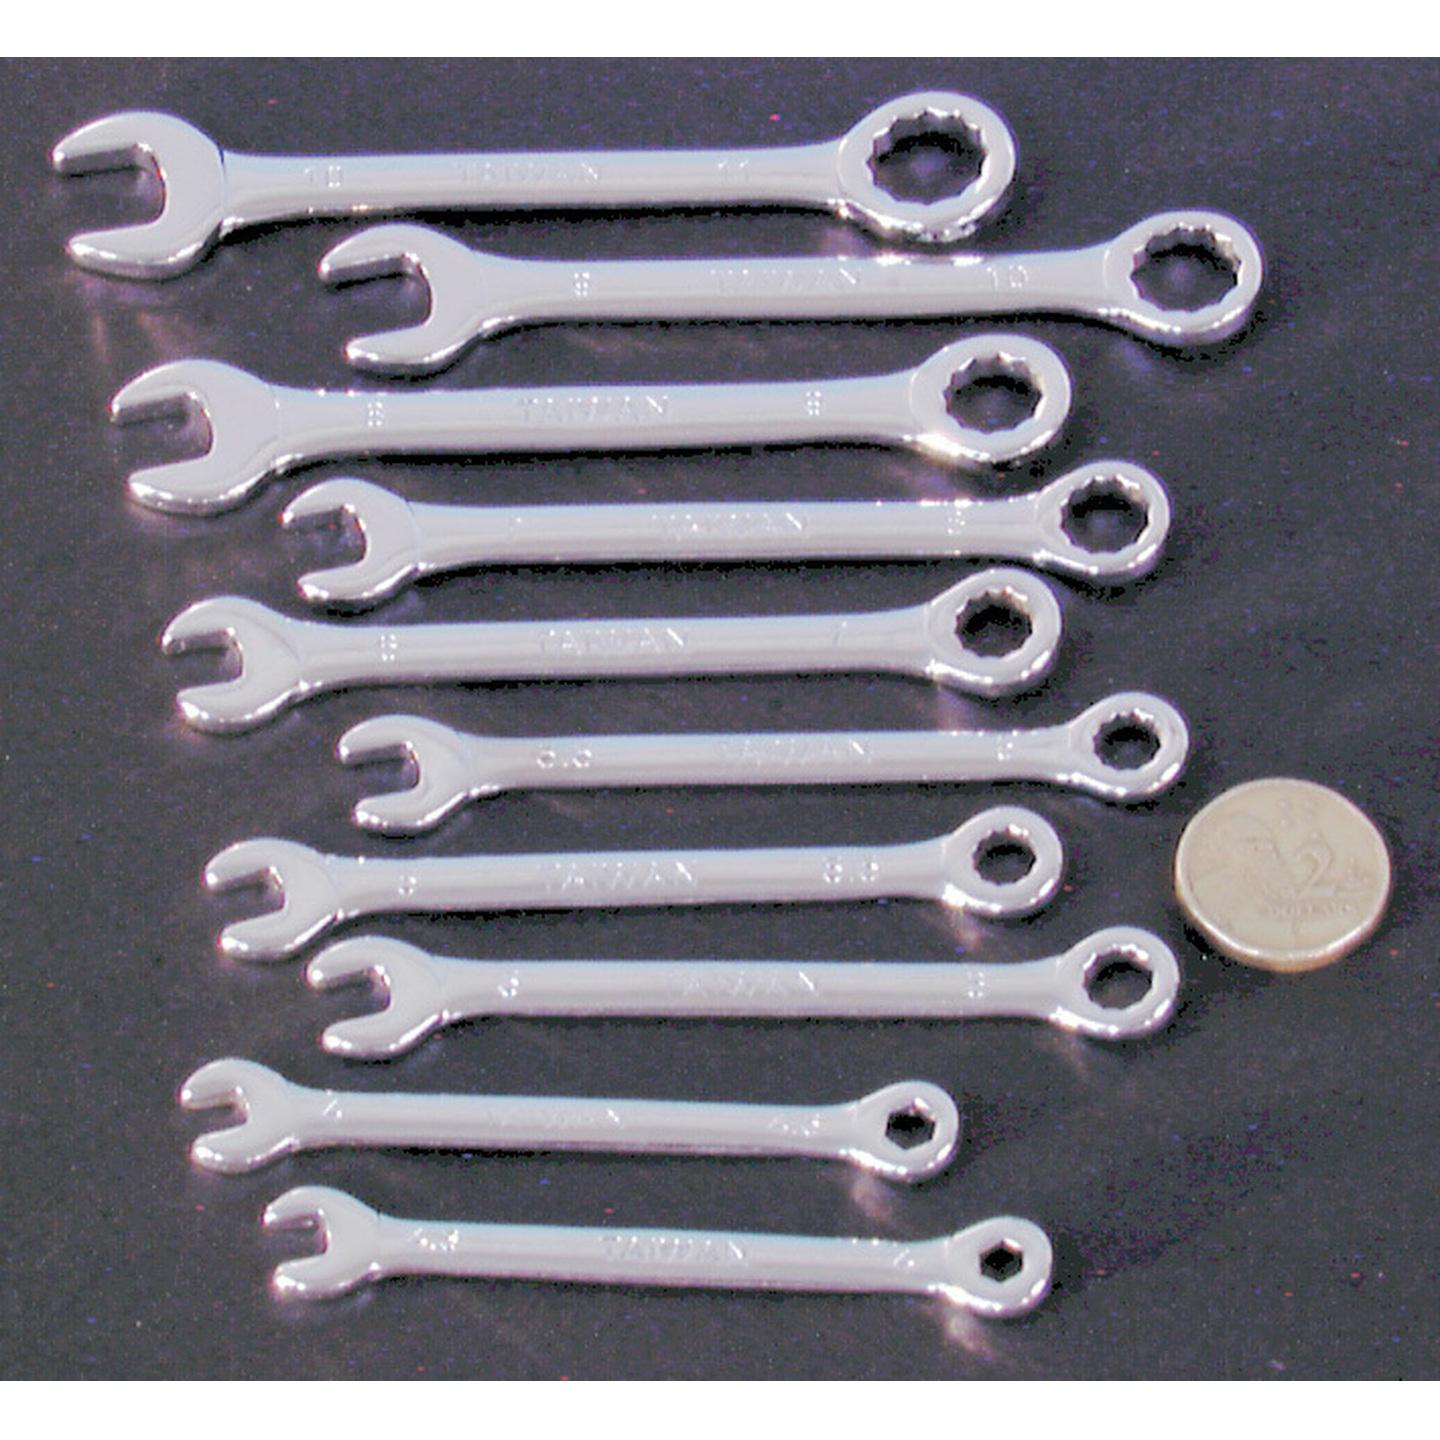 10 Piece Spanner Set For Electronics